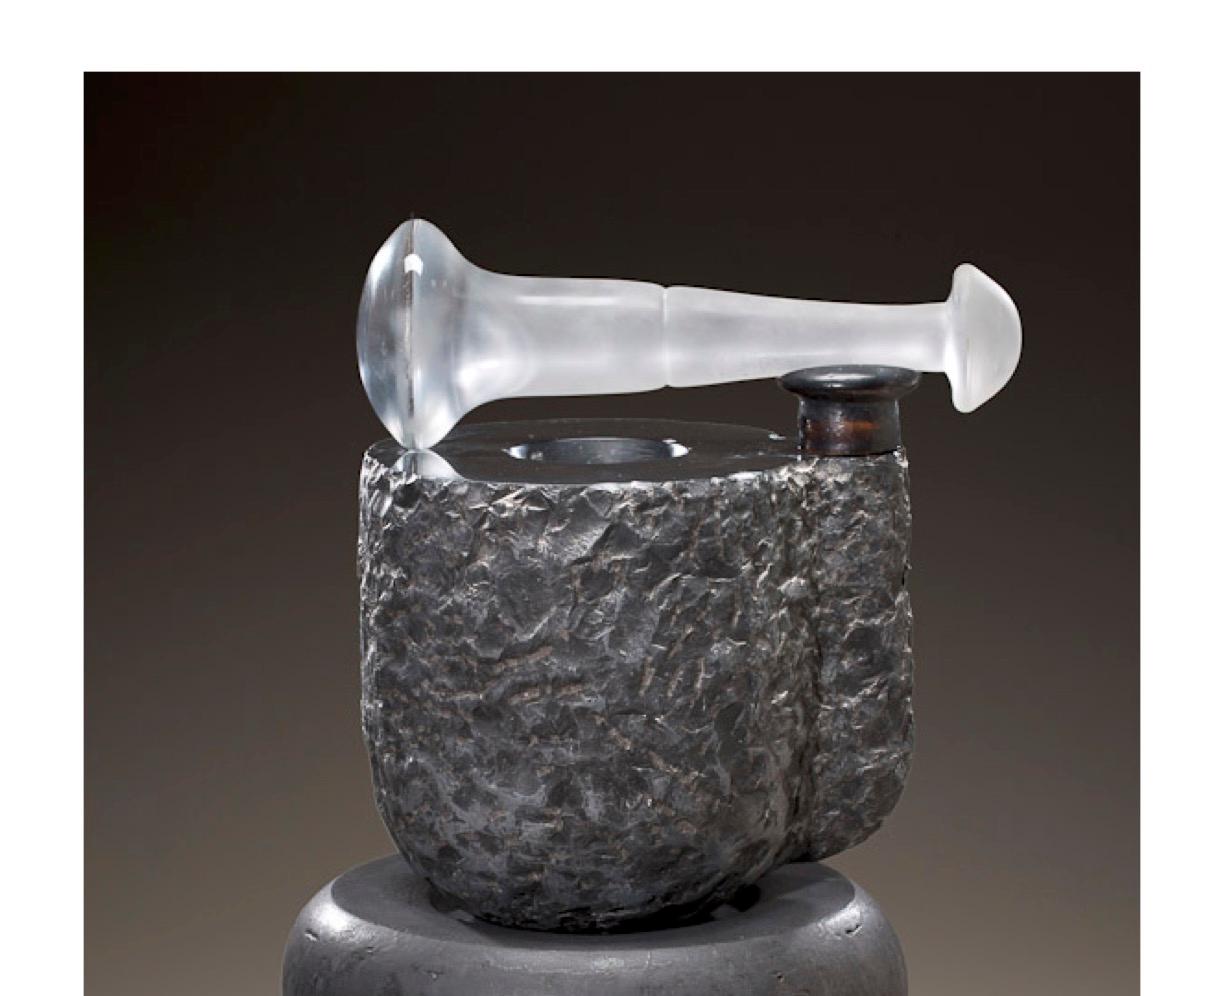 American Richard Hirsch Black Marble Mortar and Glass Pestle Sculpture, 2006 - 2010 For Sale